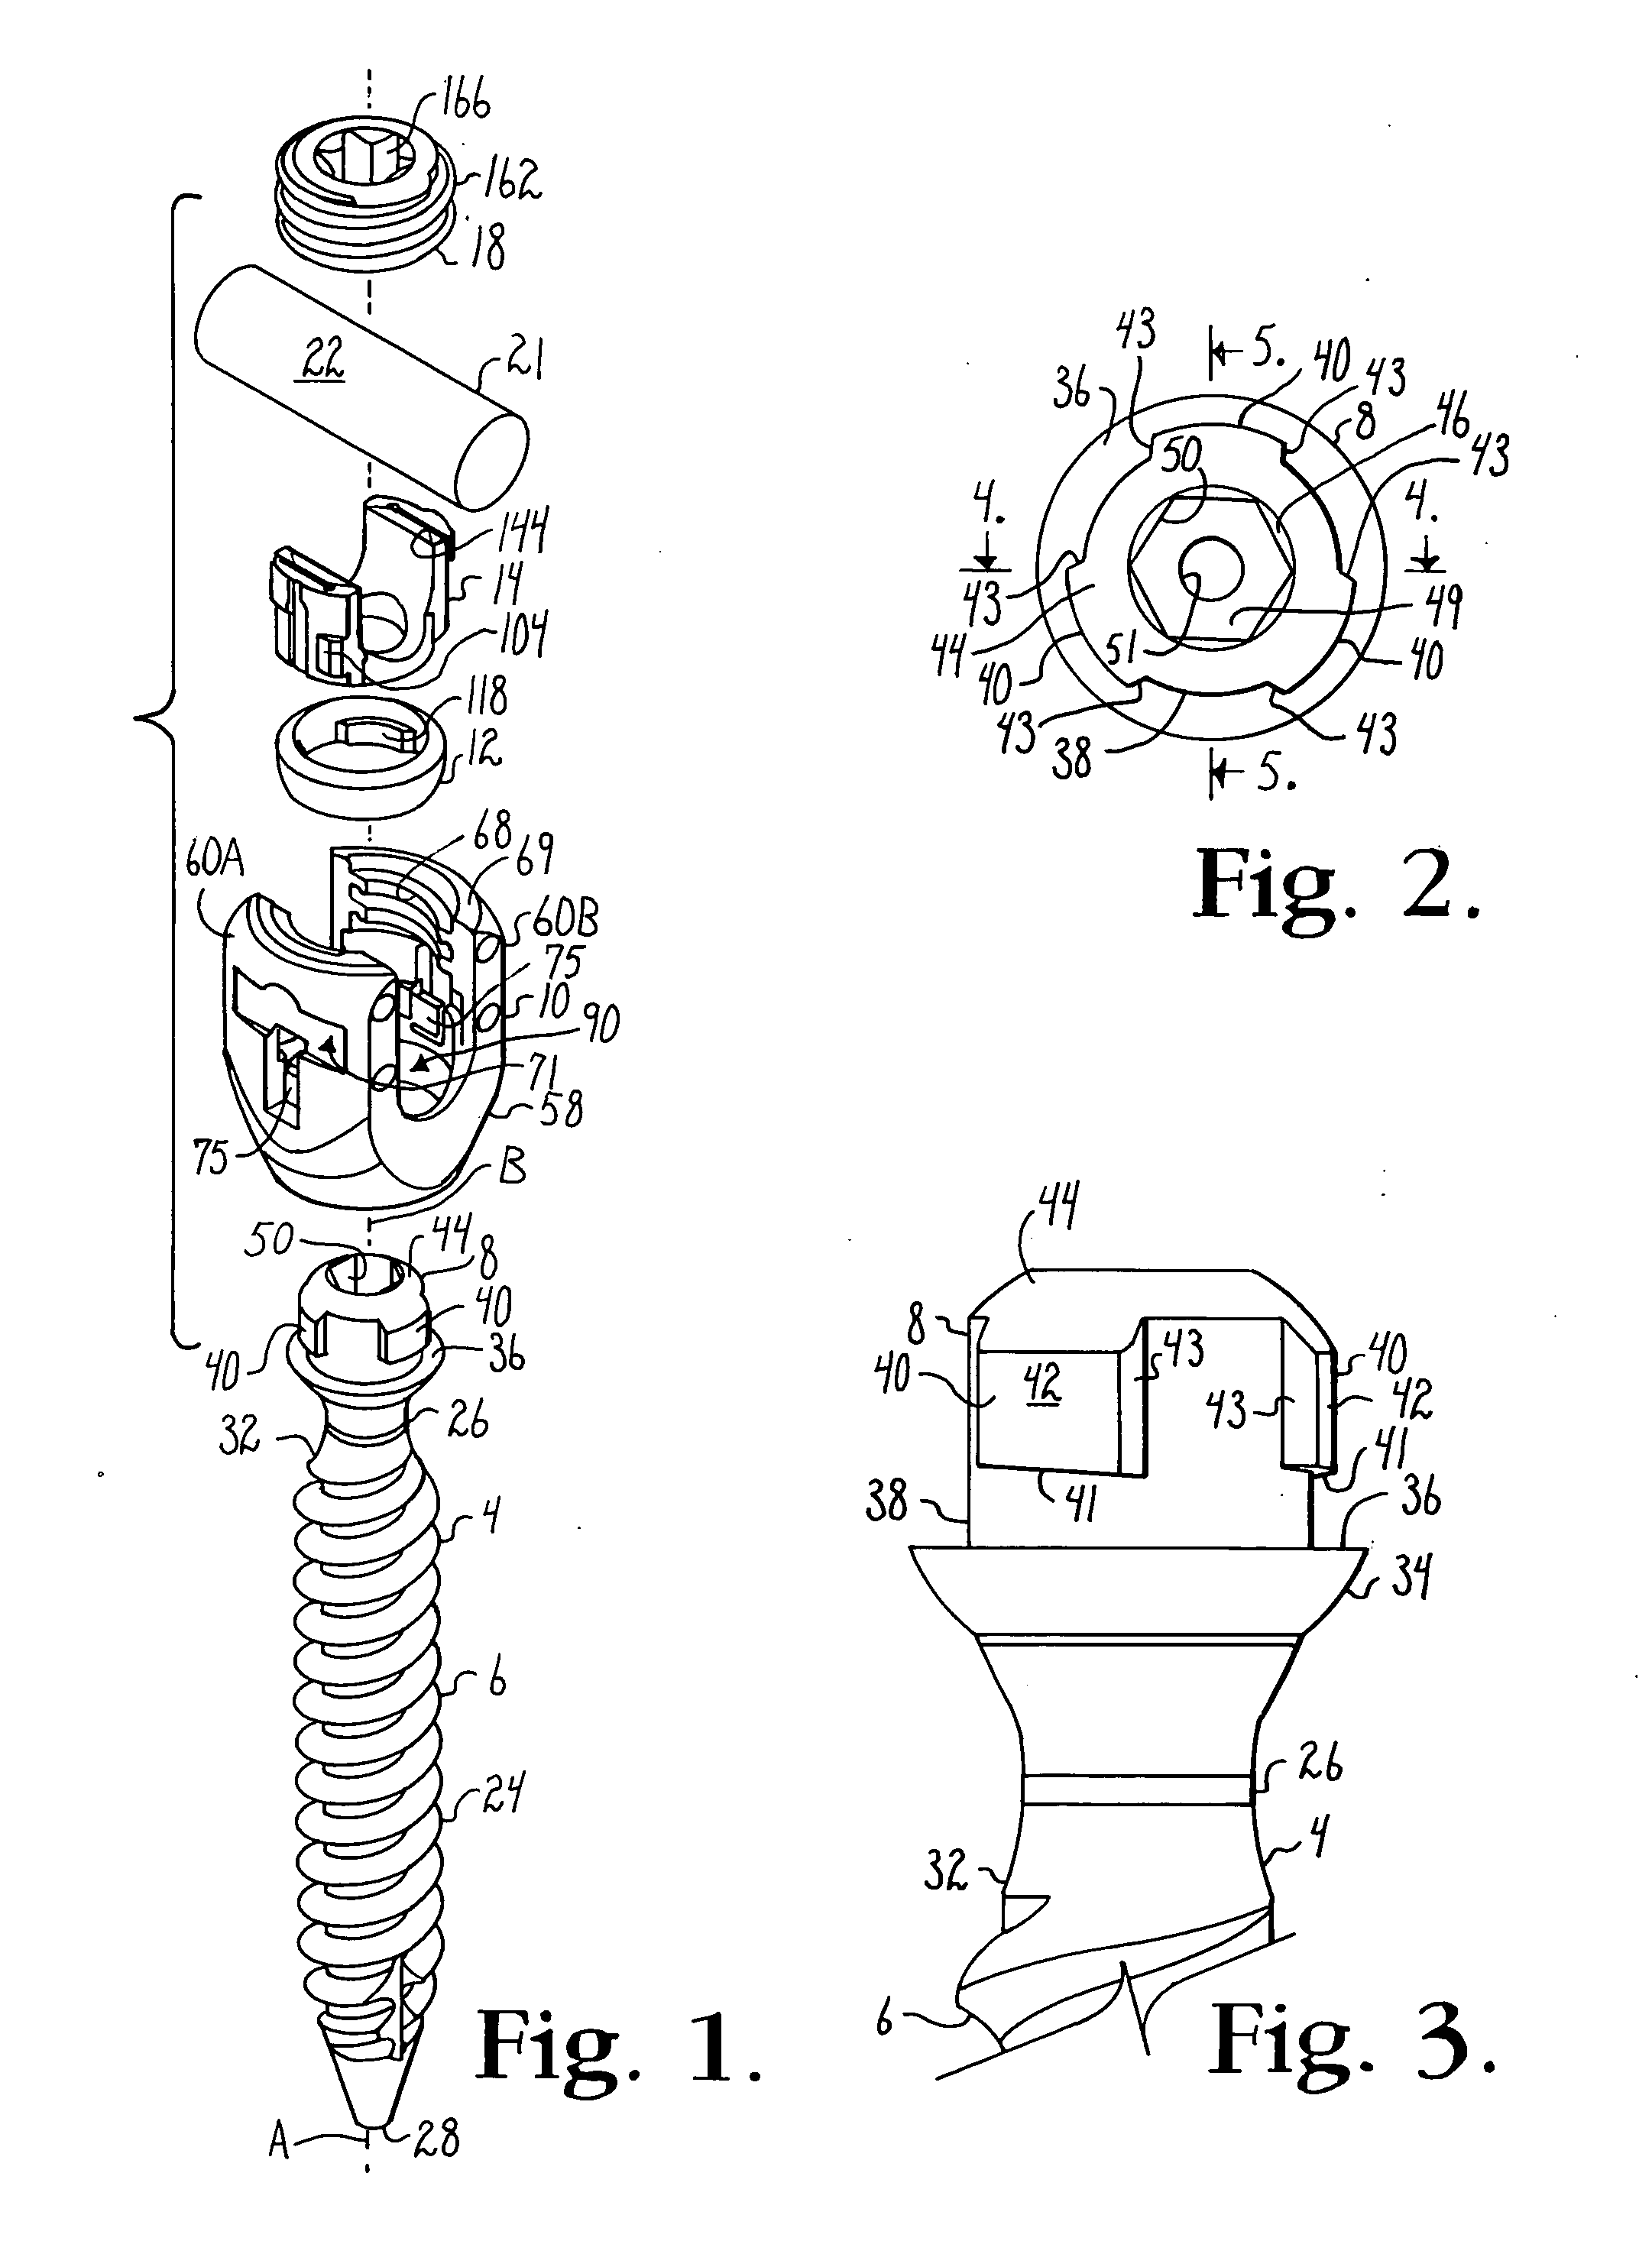 Polyaxial bone screw with cam connection and lock and release insert